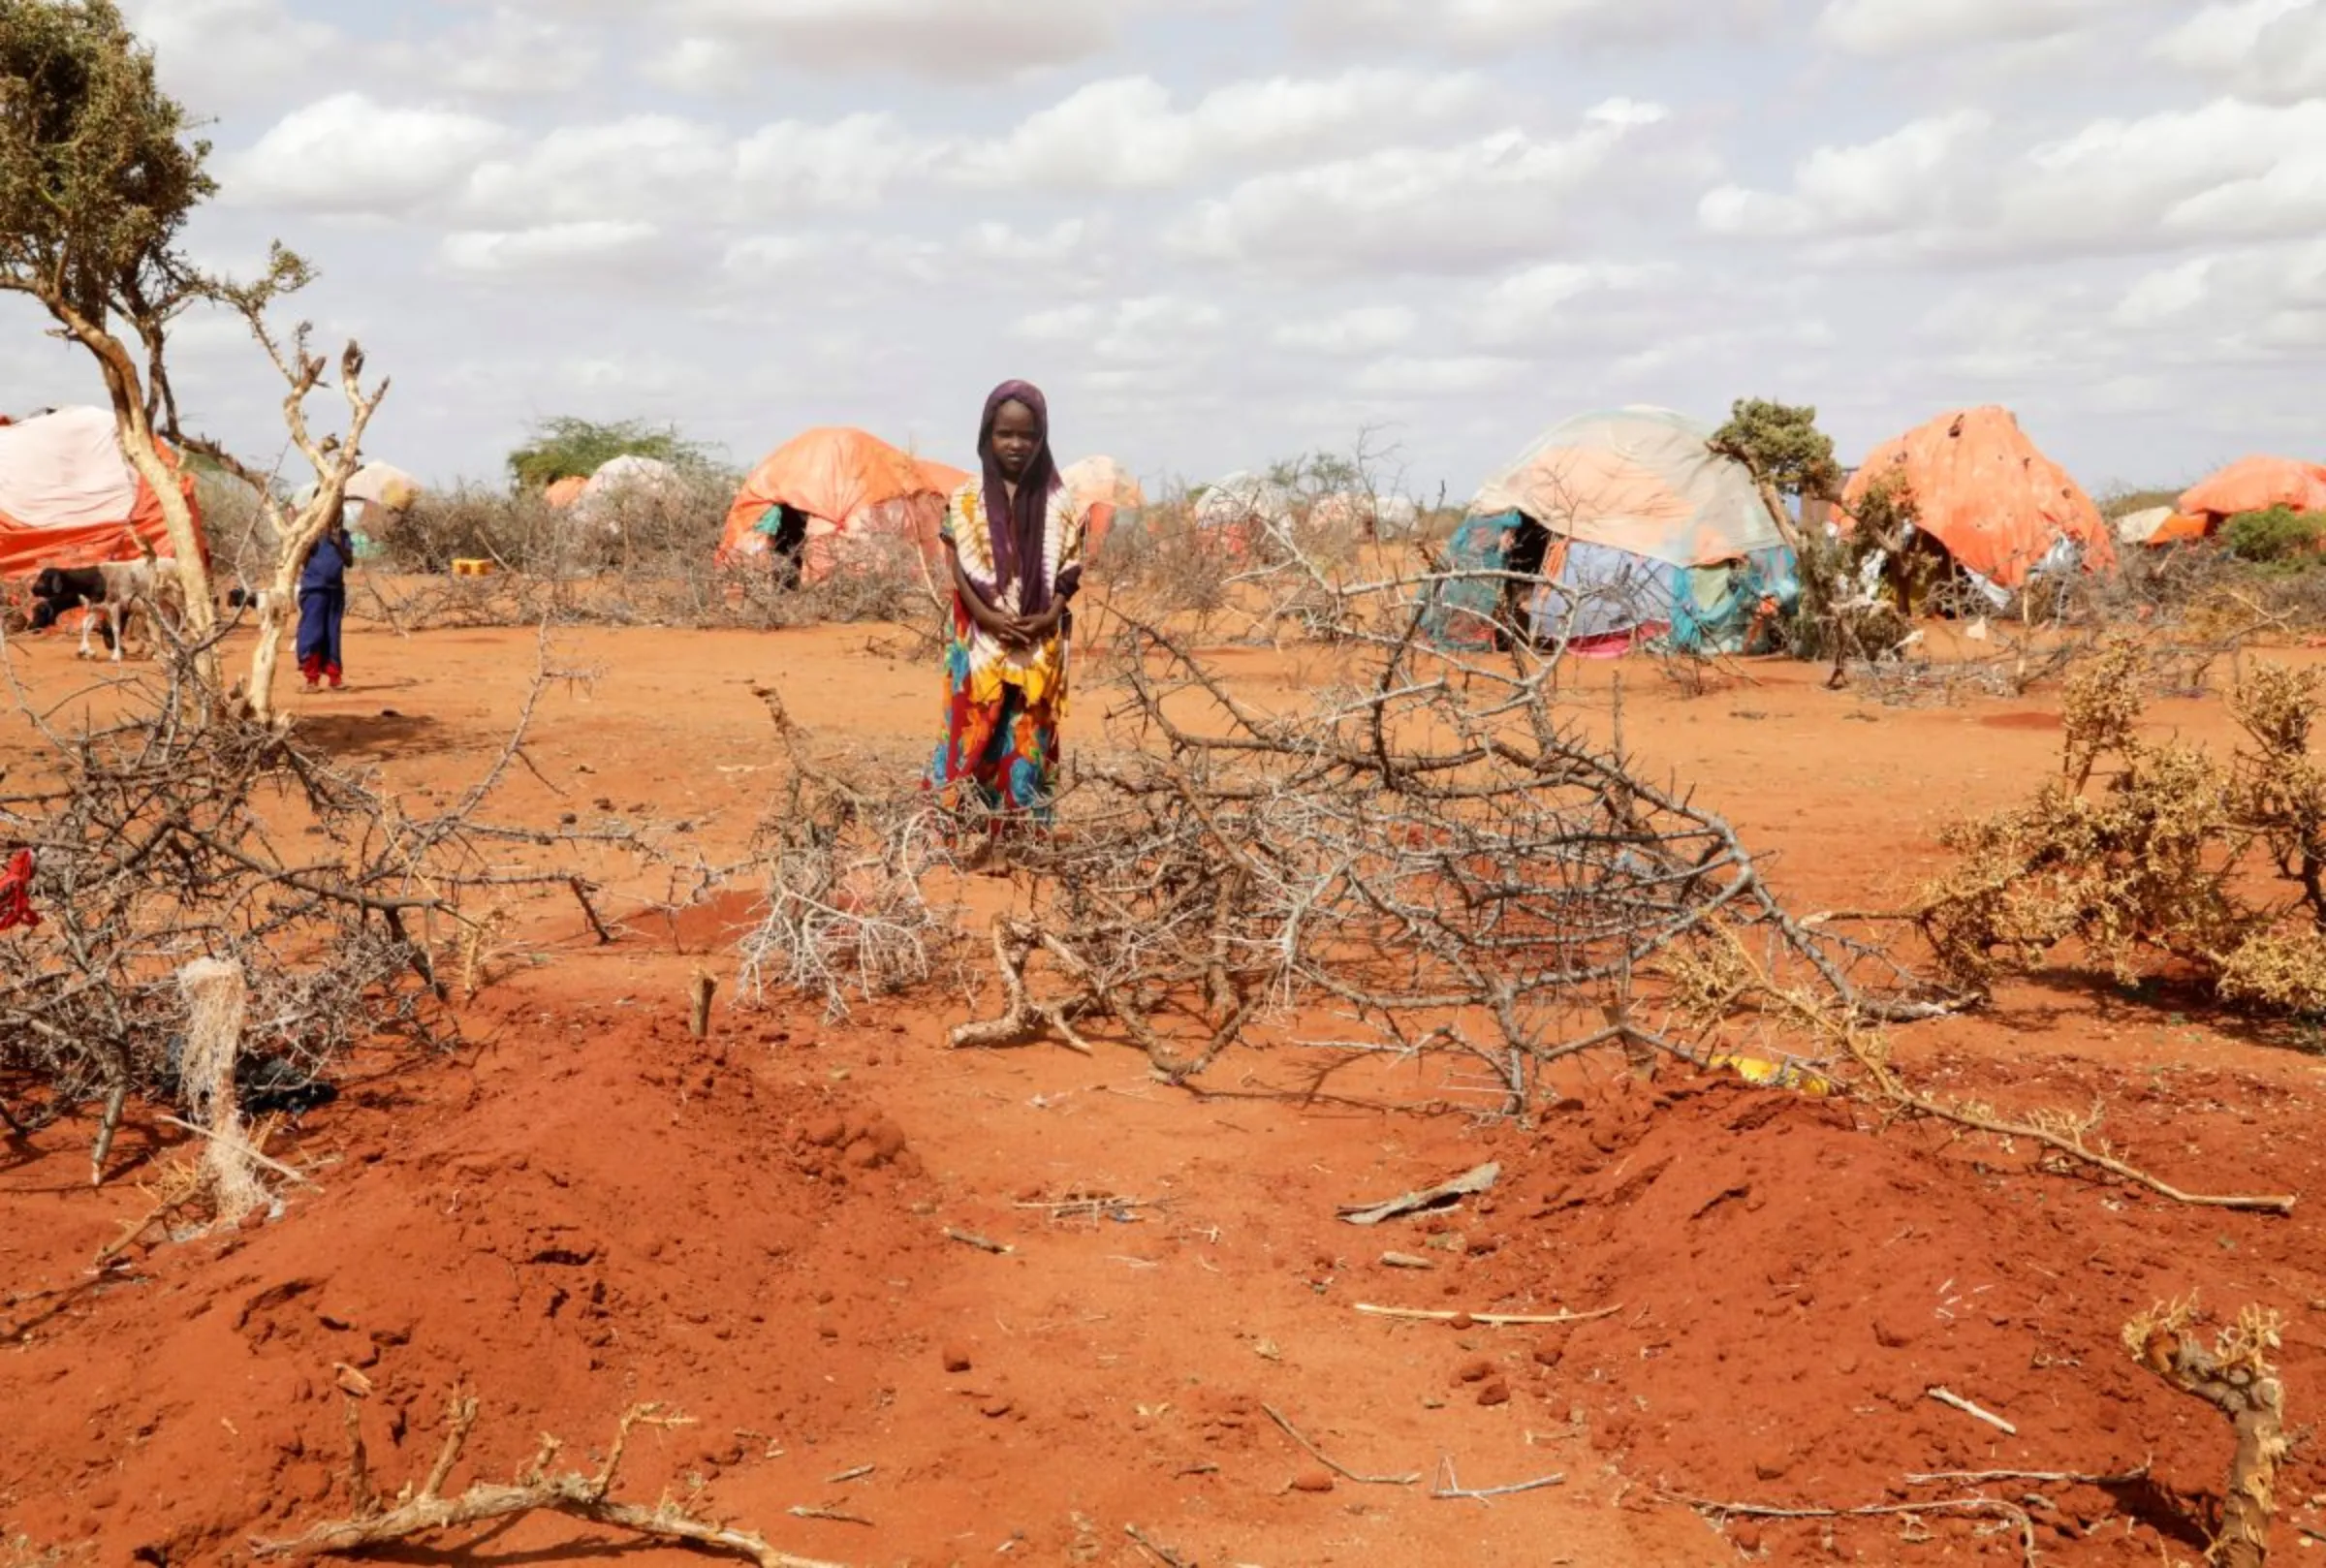 Kafia Noor, 5, stands near the grave of her twin sisters Ebla and Abdia who died of hunger at the Kaxareey camp for the internally displaced people in Dollow, Gedo region of Somalia May 24, 2022. REUTERS/Feisal Omar